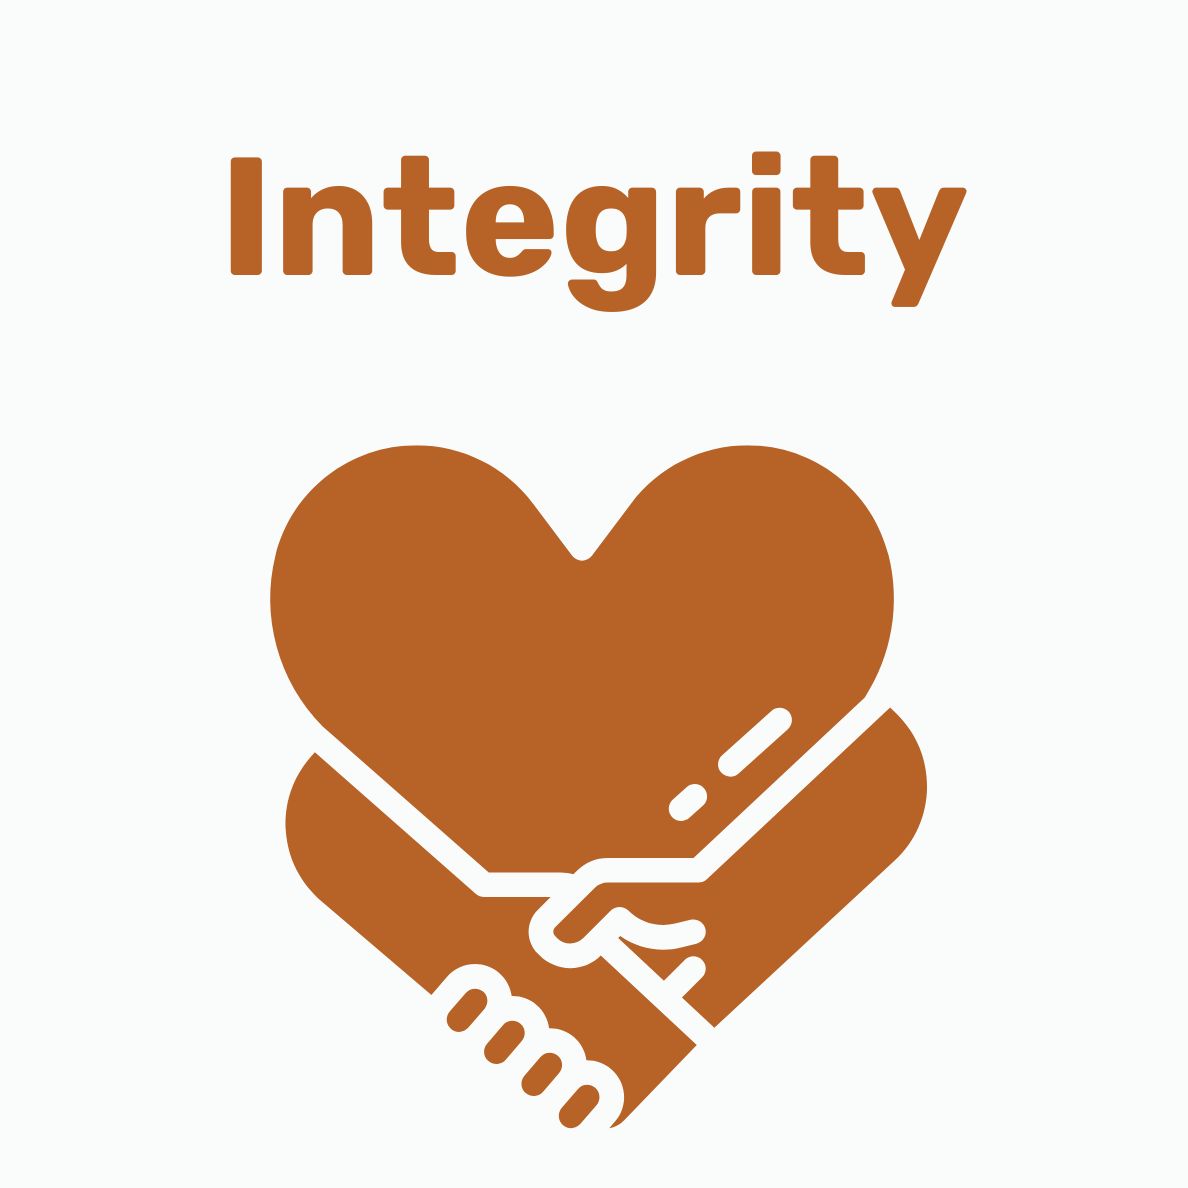 charlie's gift symbol for integrity